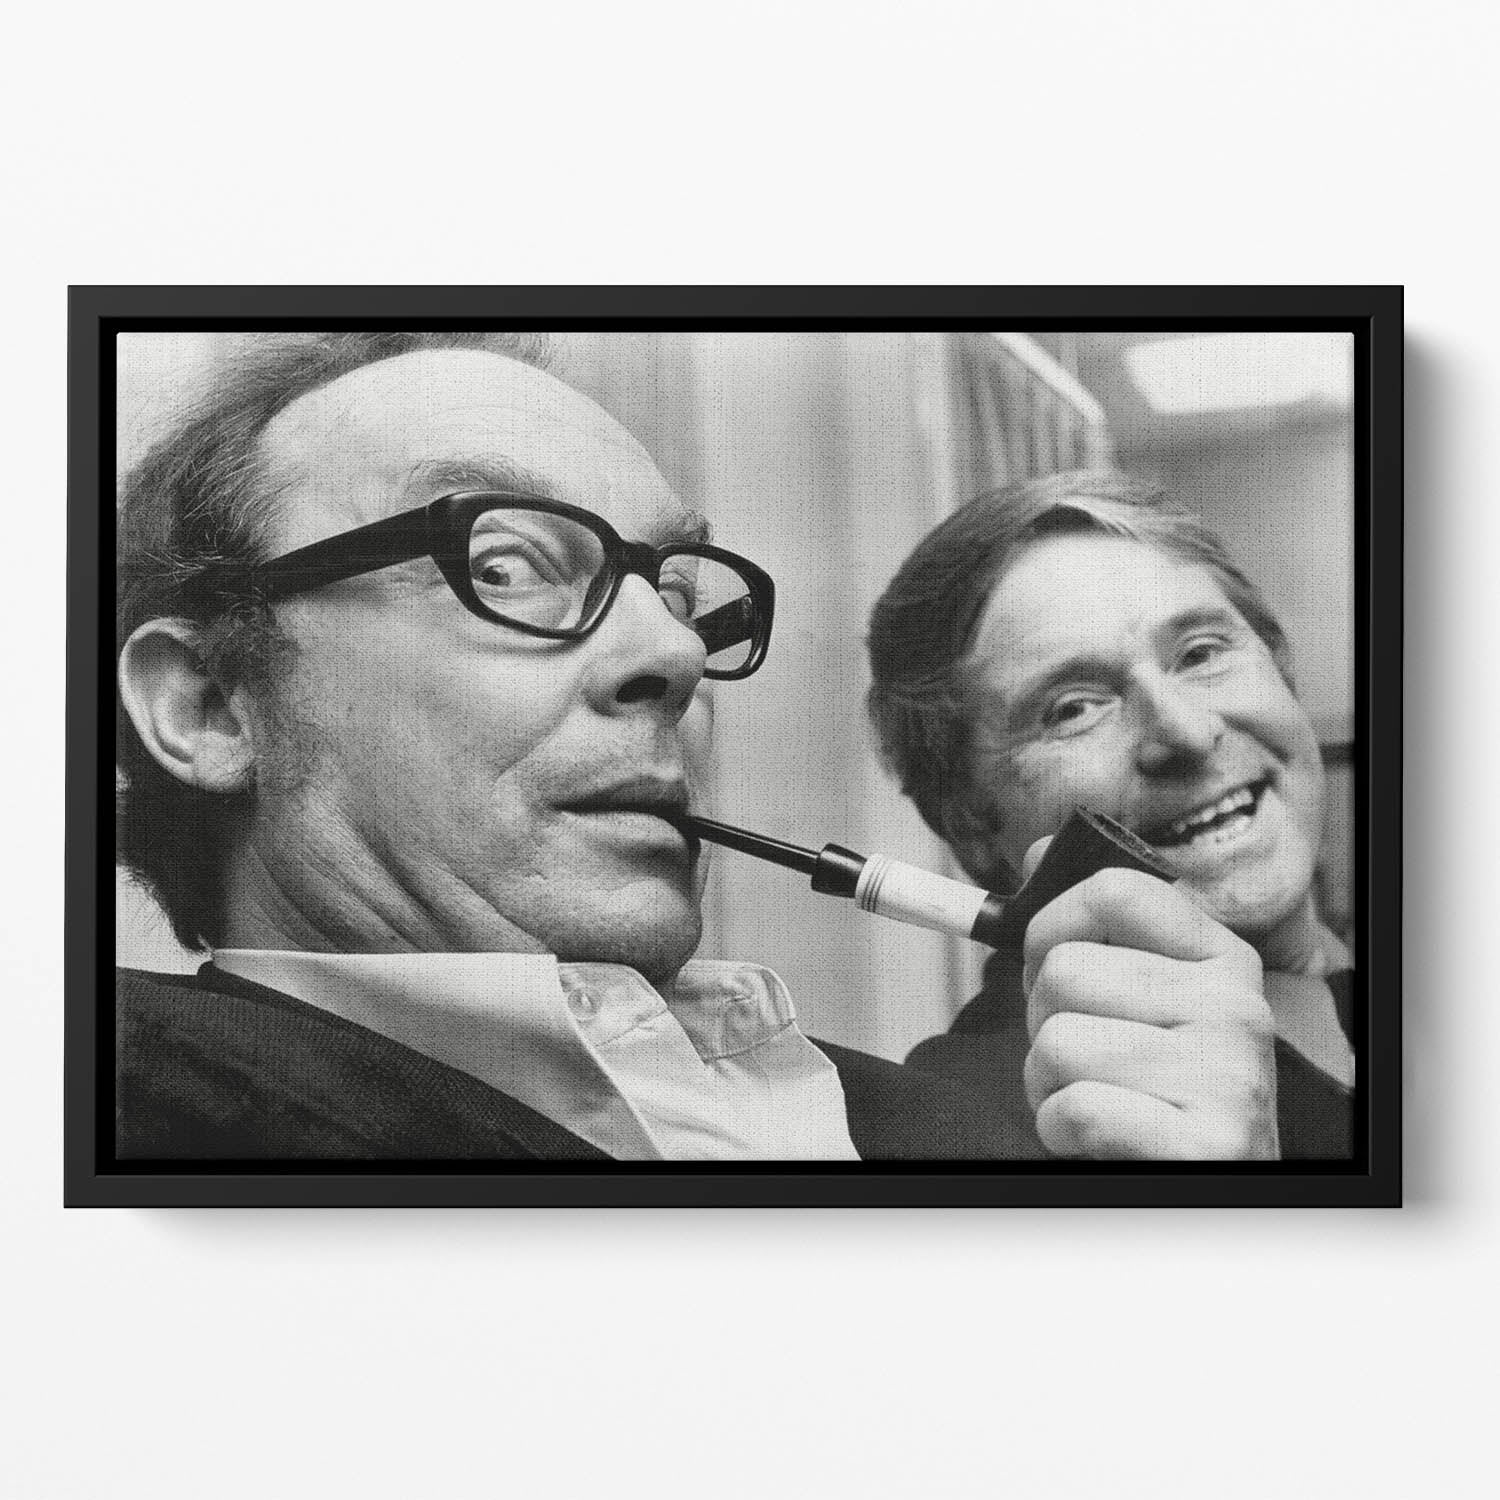 Morecambe and Wise in the 70s Floating Framed Canvas